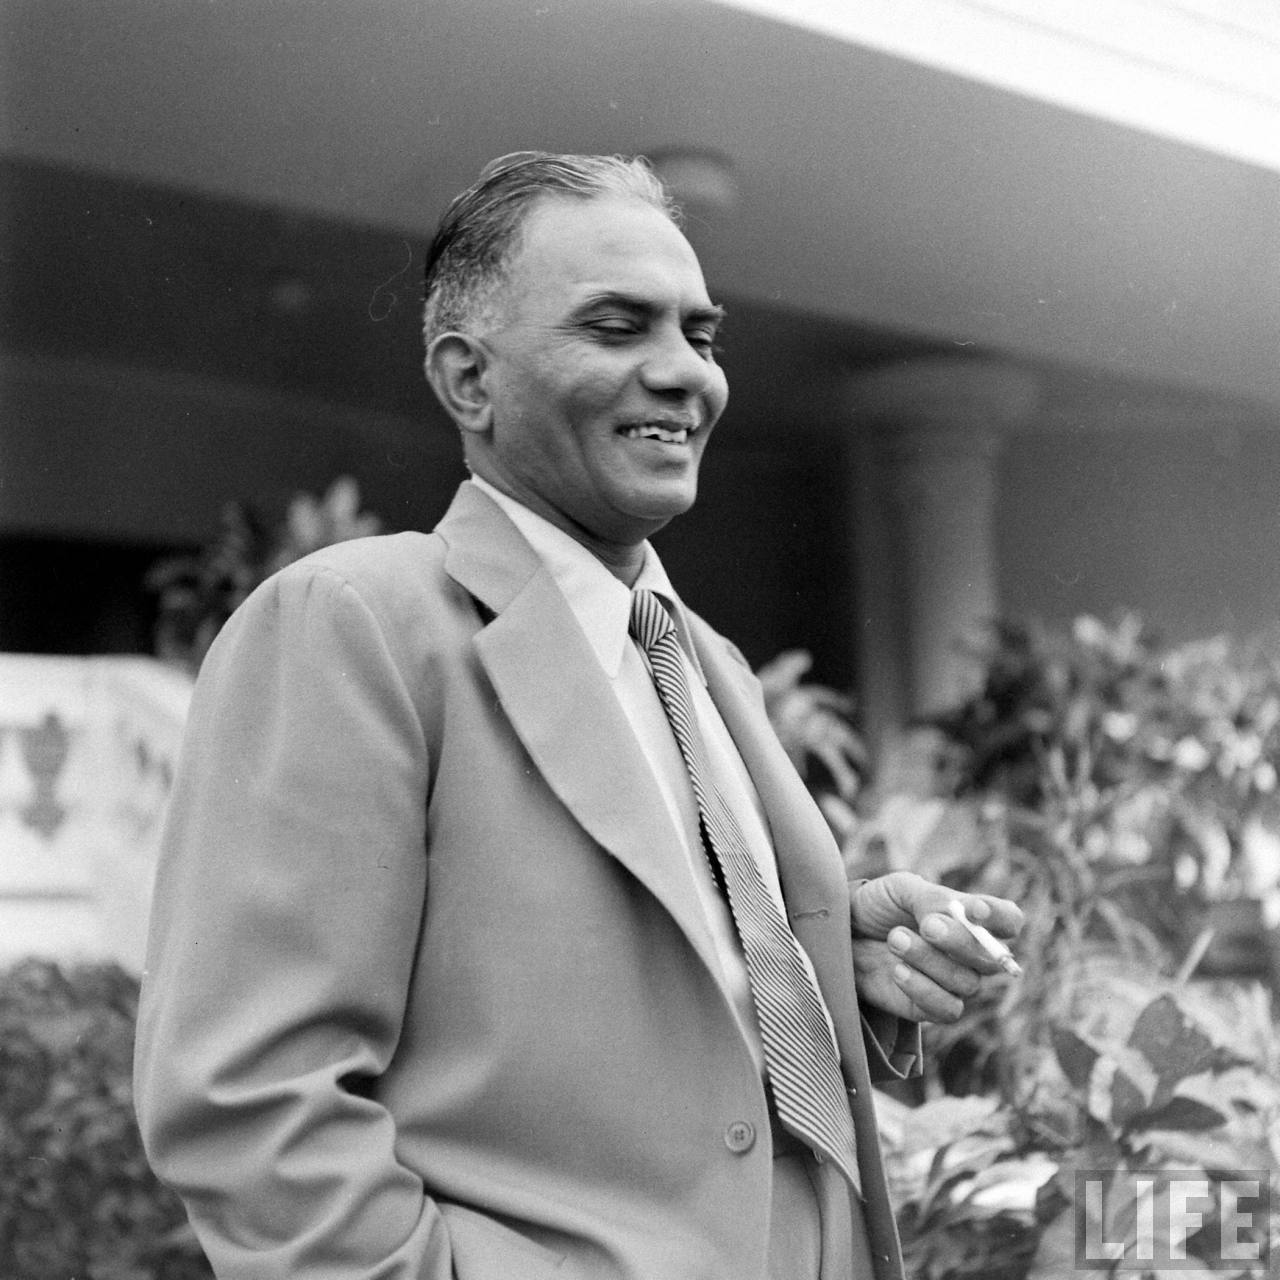 Last Prime Minister of Hyderabad State Mir Laik Ali | Operation Polo | Hyderabad Police Action | Annexation of Hyderabad, Hyderabad (Deccan), Telangana, India | Rare & Old Vintage Photos of Operation Polo, Hyderabad (Deccan), Telangana, India (1948)